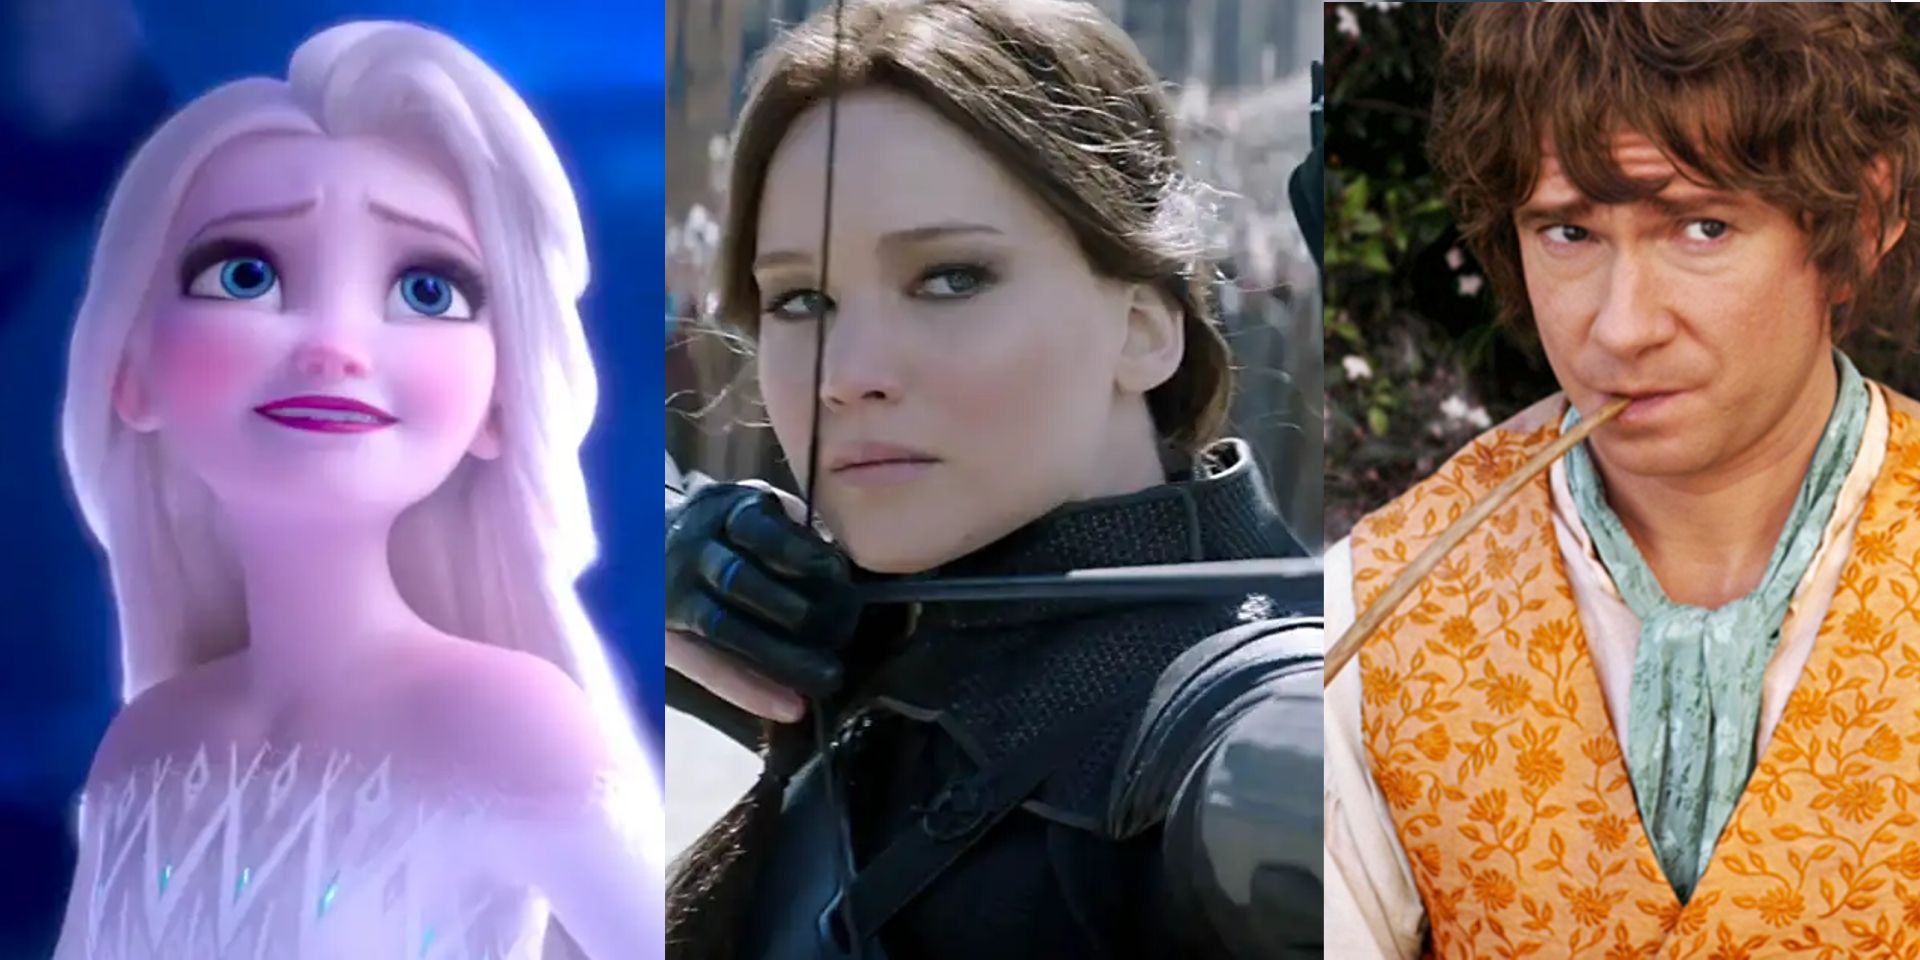 Split Image of Elsa from Frozen, Katniss from Hunger Games: Mockingjay Part 2, and Bilbo from The Hobbit: An Unexpected Journey